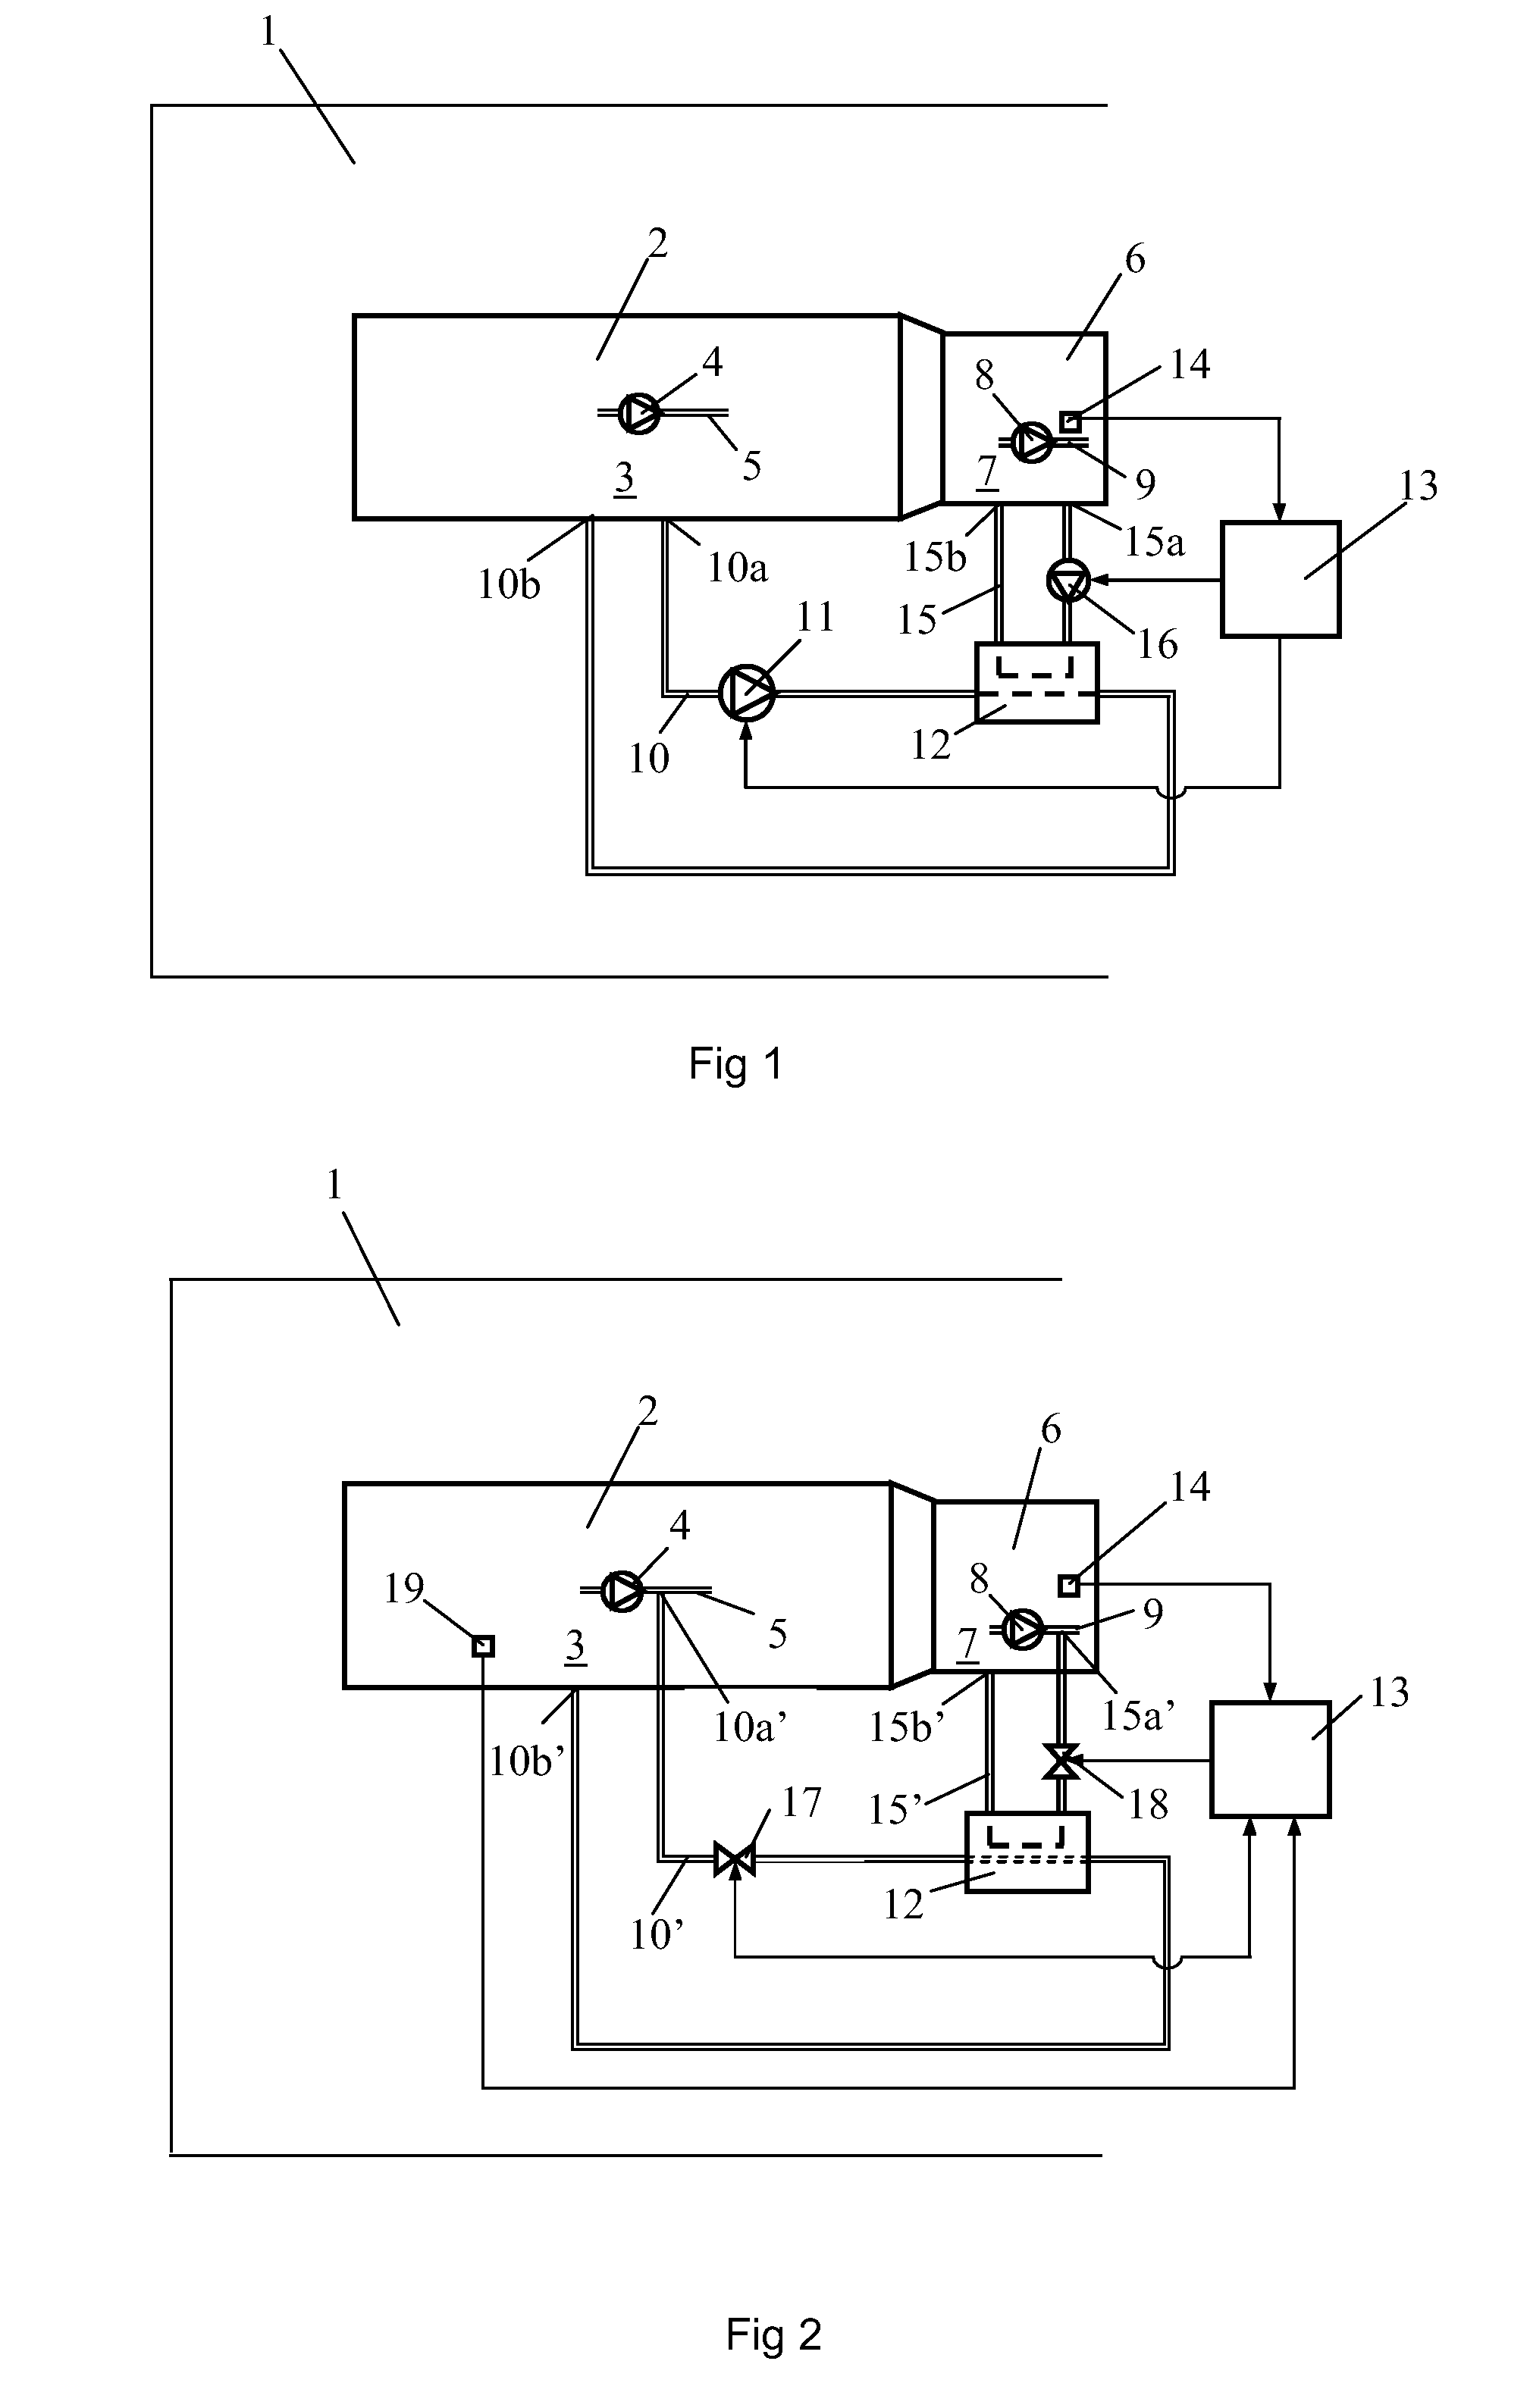 Arrangement for heating oil in a gearbox